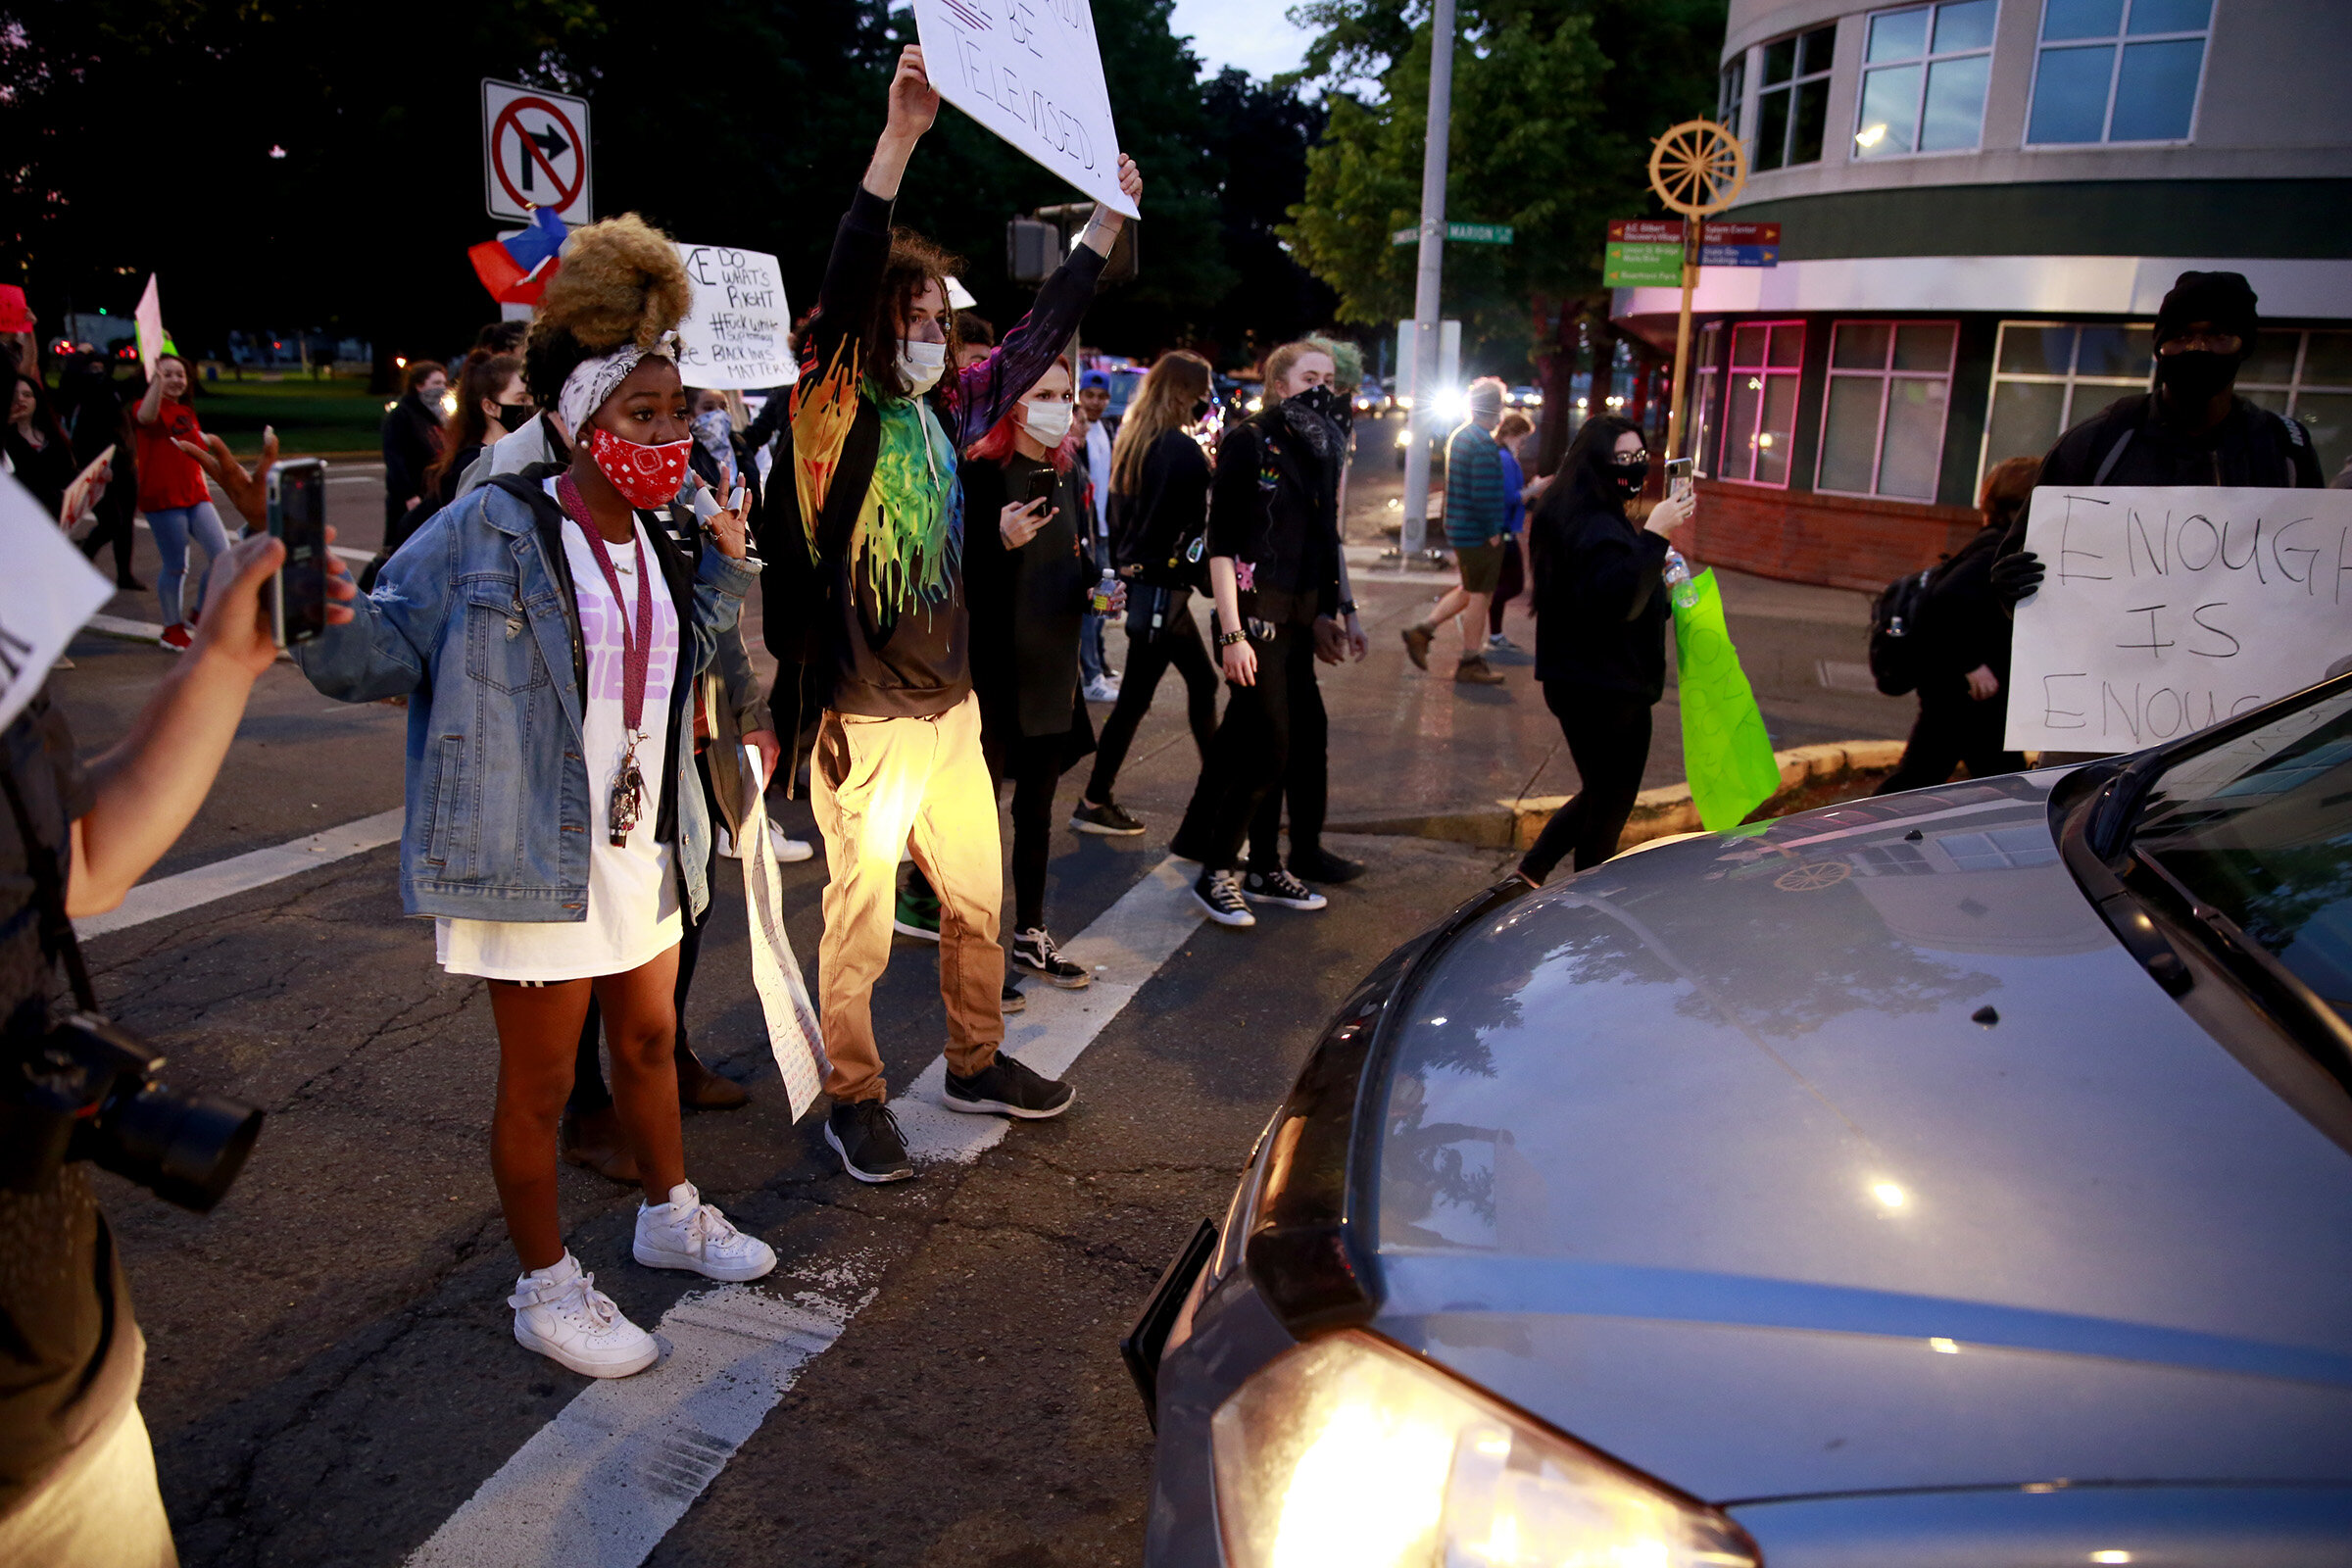  Protesters get into a confrontation with the driver and passenger of a vehicle during their march off the Marion Street Bridge into downtown Salem, Oregon, on Sunday, May 31, 2020. 